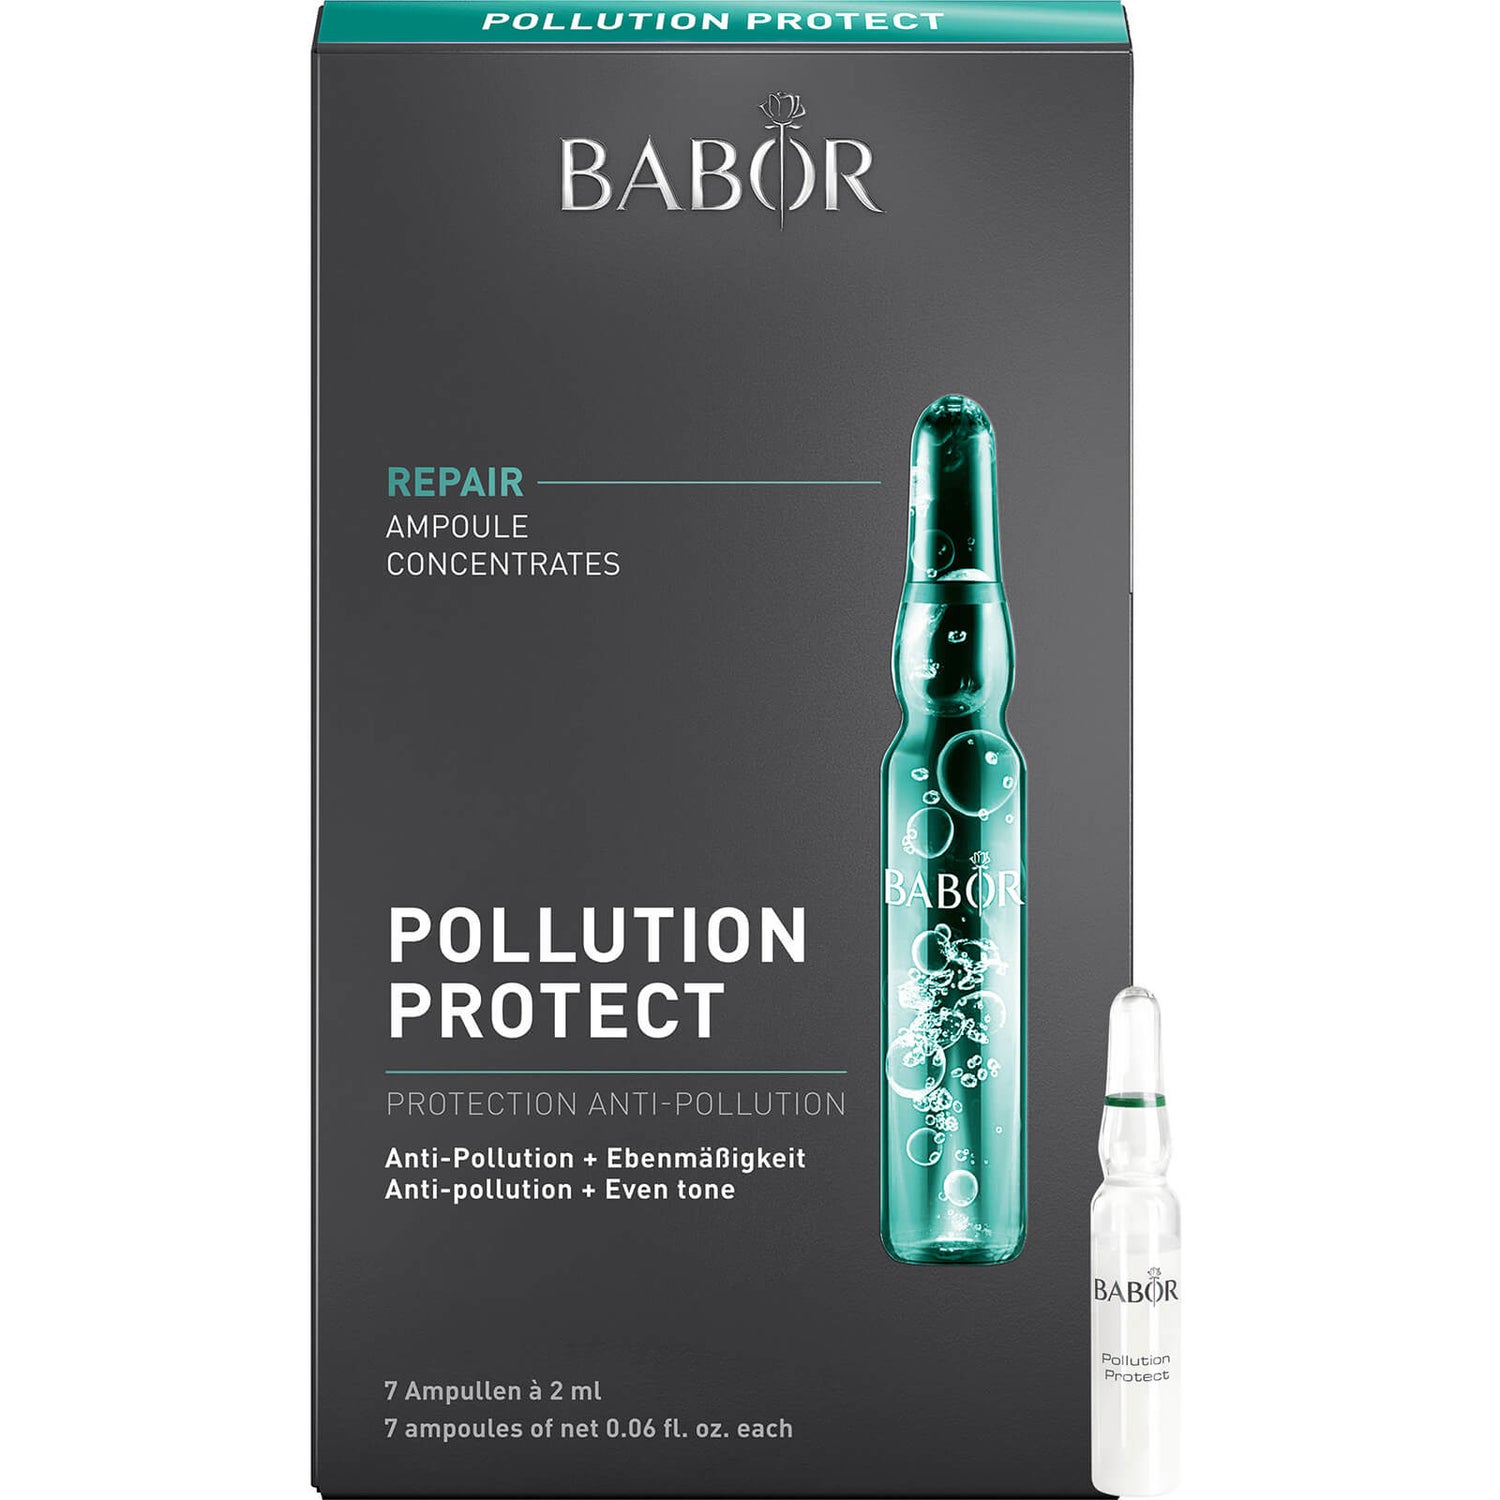 BABOR Pollution Protect